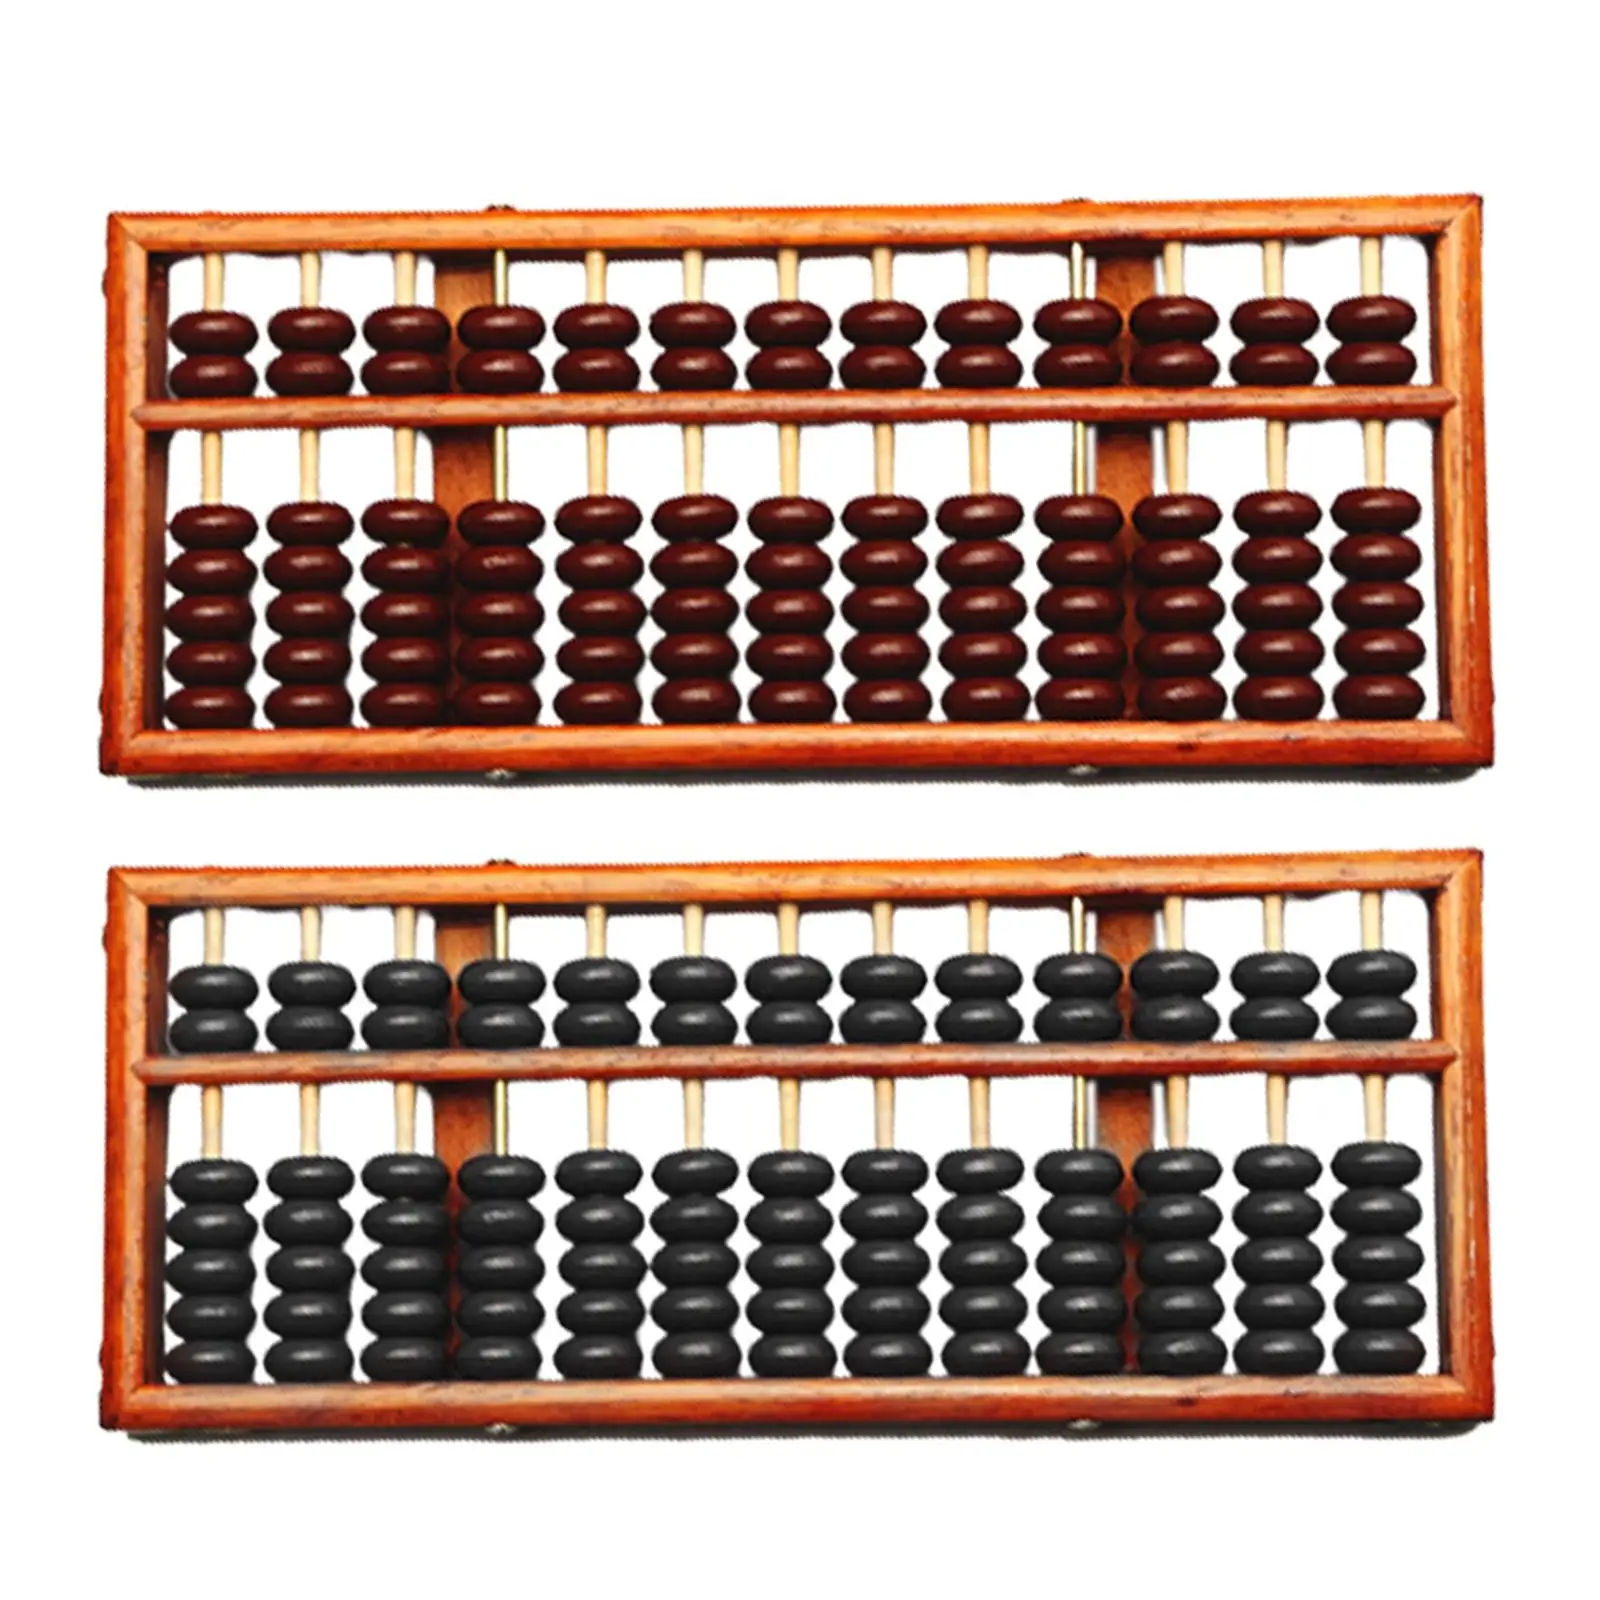 Vintage 13 digits Chinese Soroban Wood Abacus Mathematic Education 28x12x2cm 7 Beads Per Row for Adults Kids Practical Durable